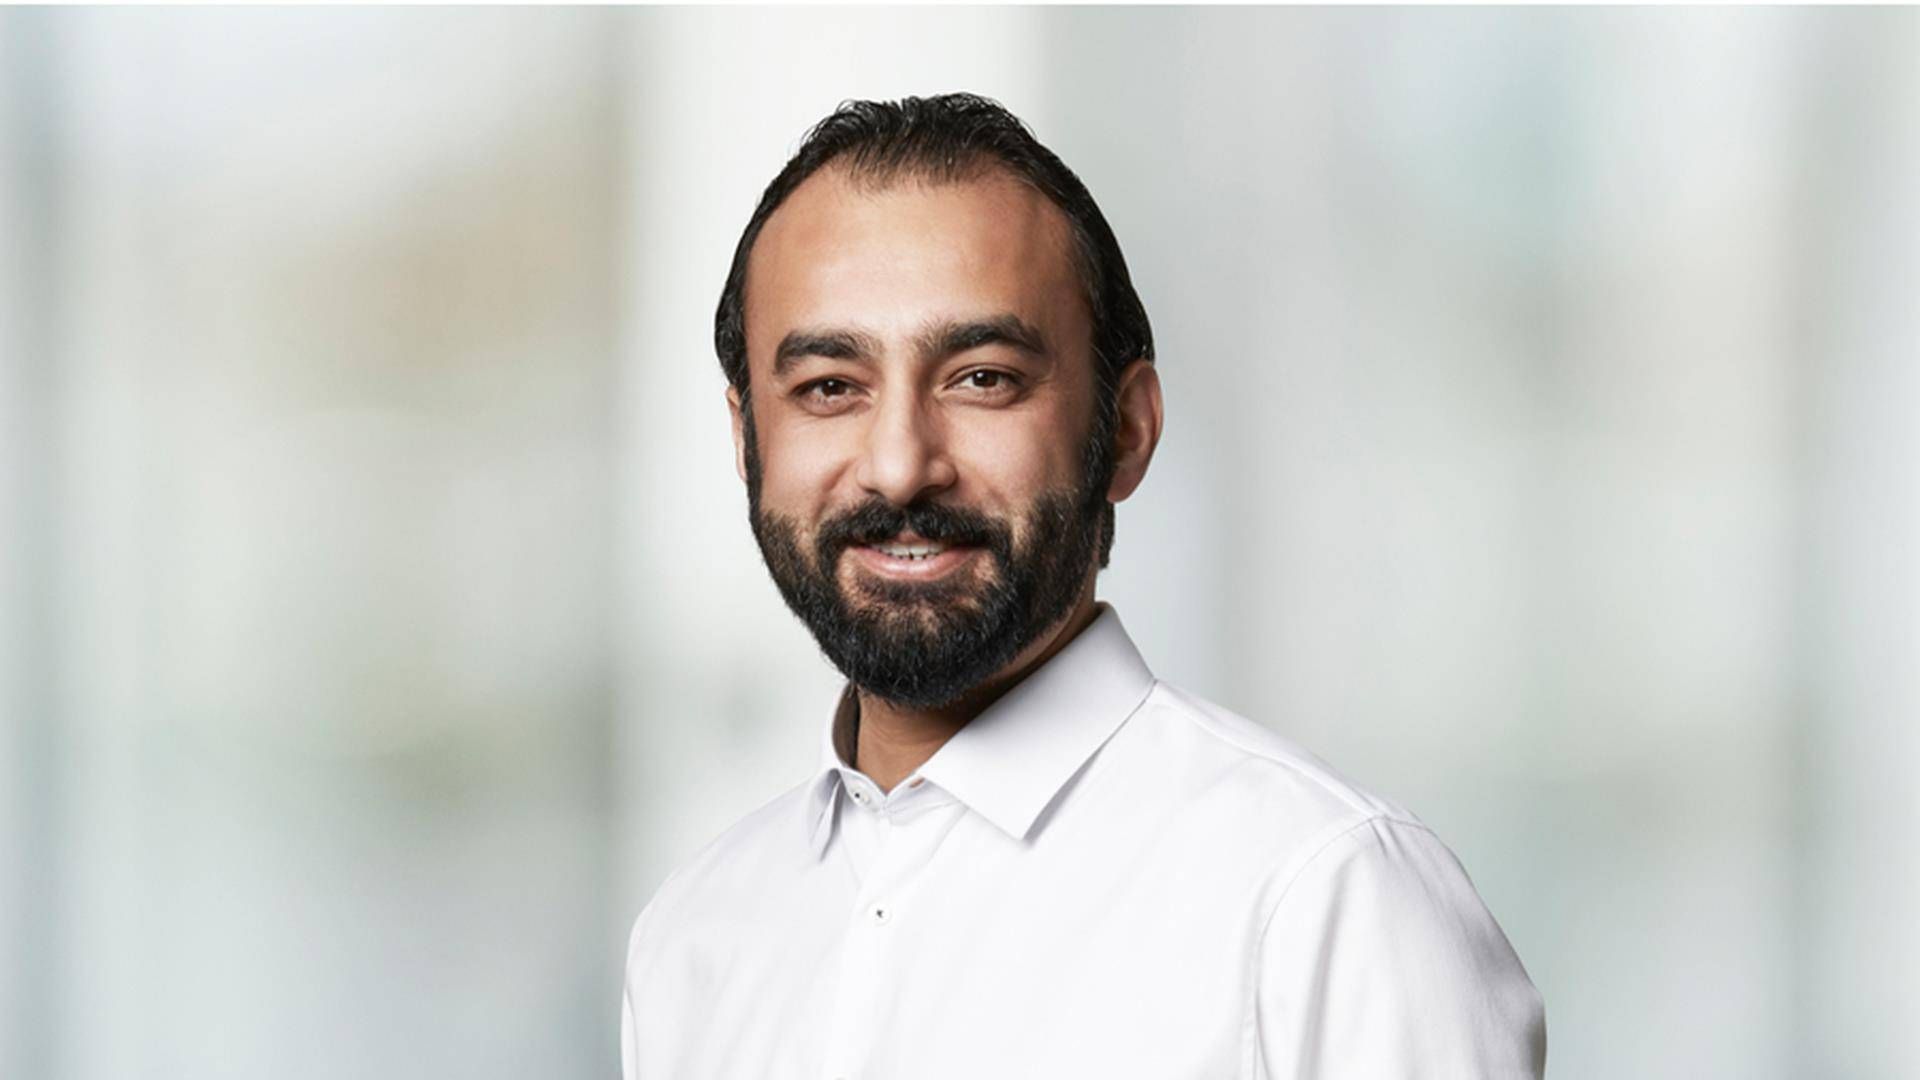 The stop-and-go expansion in Europe has led to low utilization of LM's factories, new CEO Hanif Mashal said last week. | Photo: Lm Wind Power